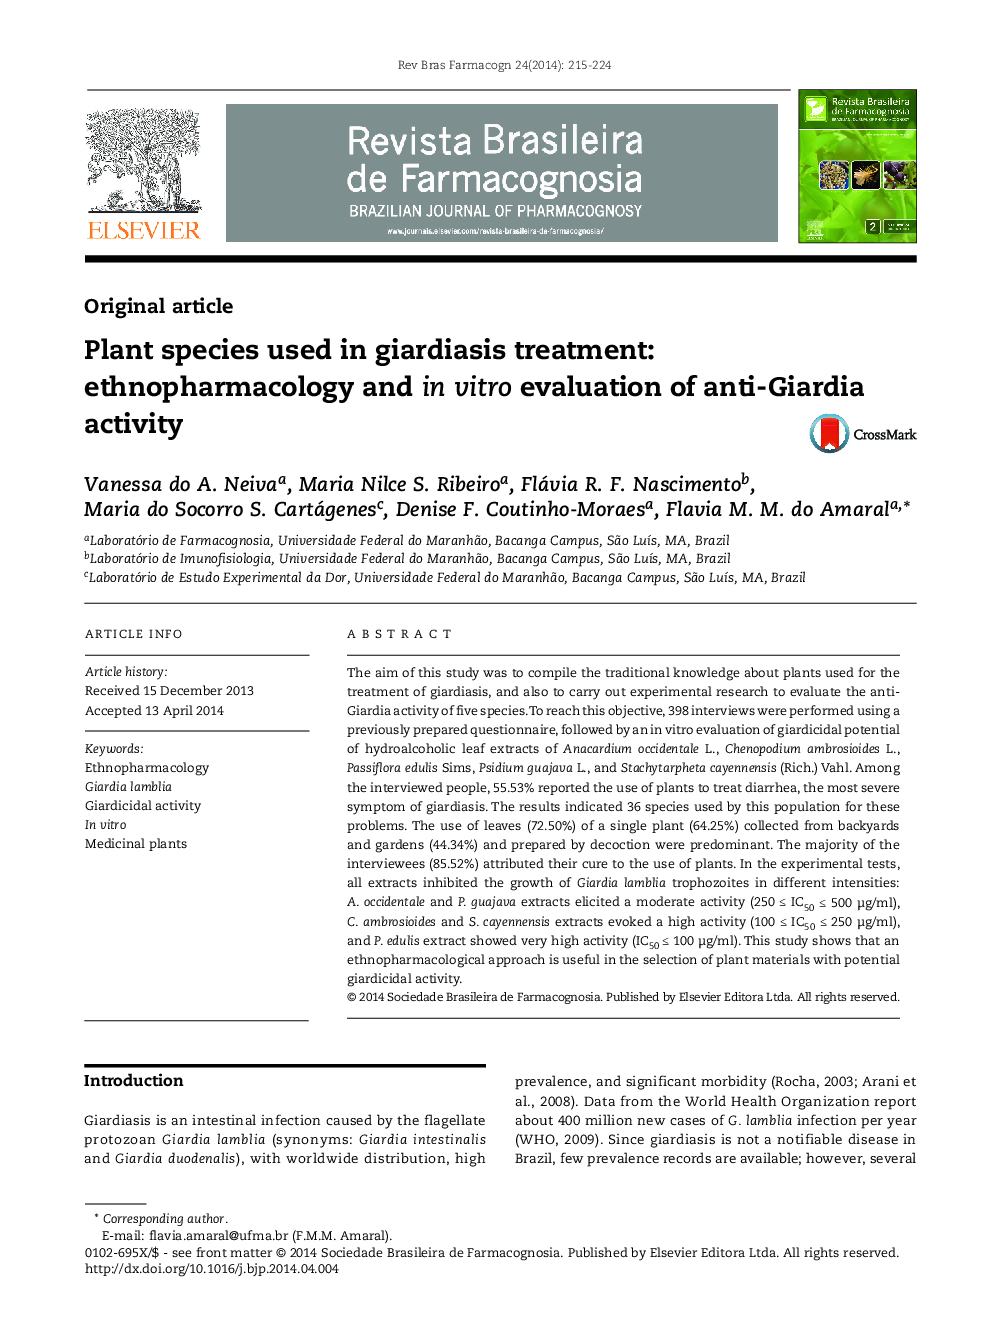 Plant species used in giardiasis treatment: ethnopharmacology and in vitro evaluation of anti-Giardia activity